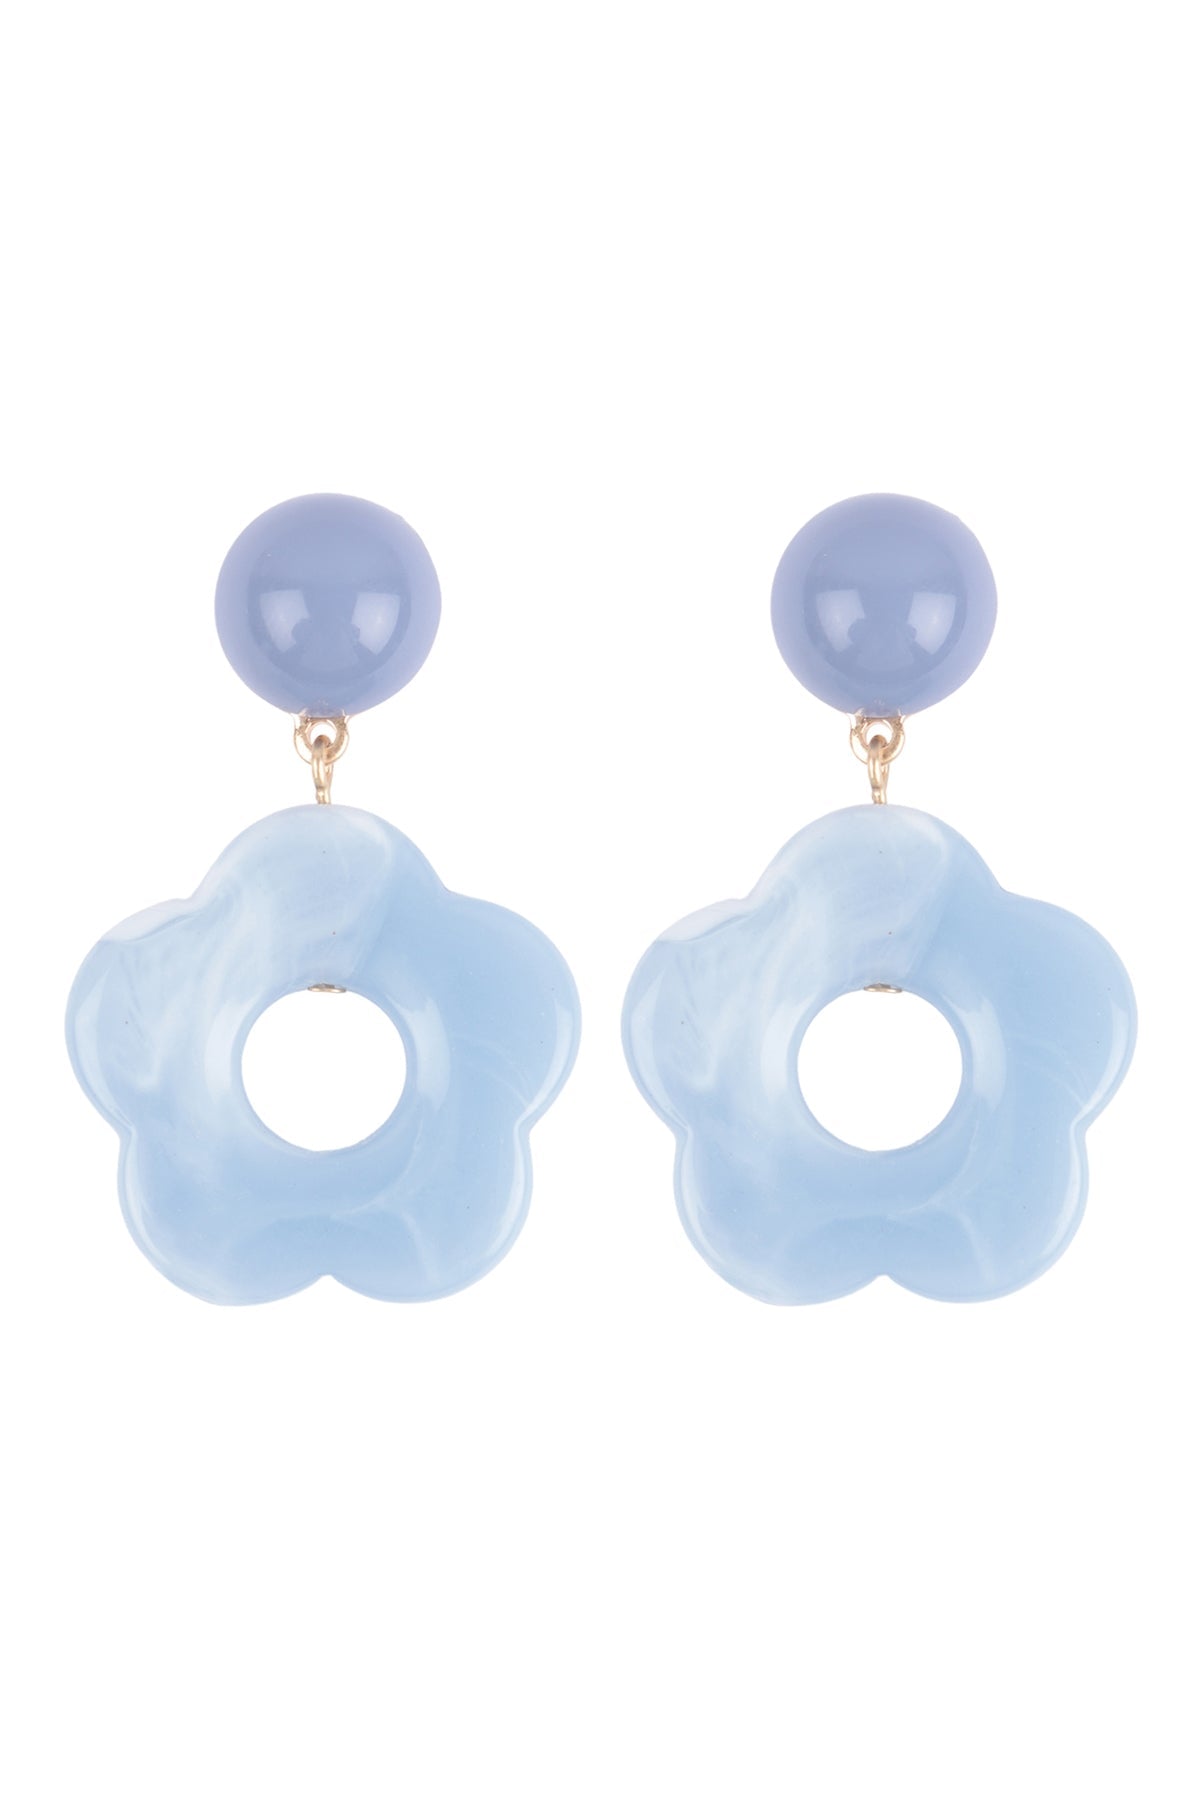 ACRYLIC FLOWER DROP, ROUND POST EARRINGS/6PCS (NOW $1.75 ONLY!)